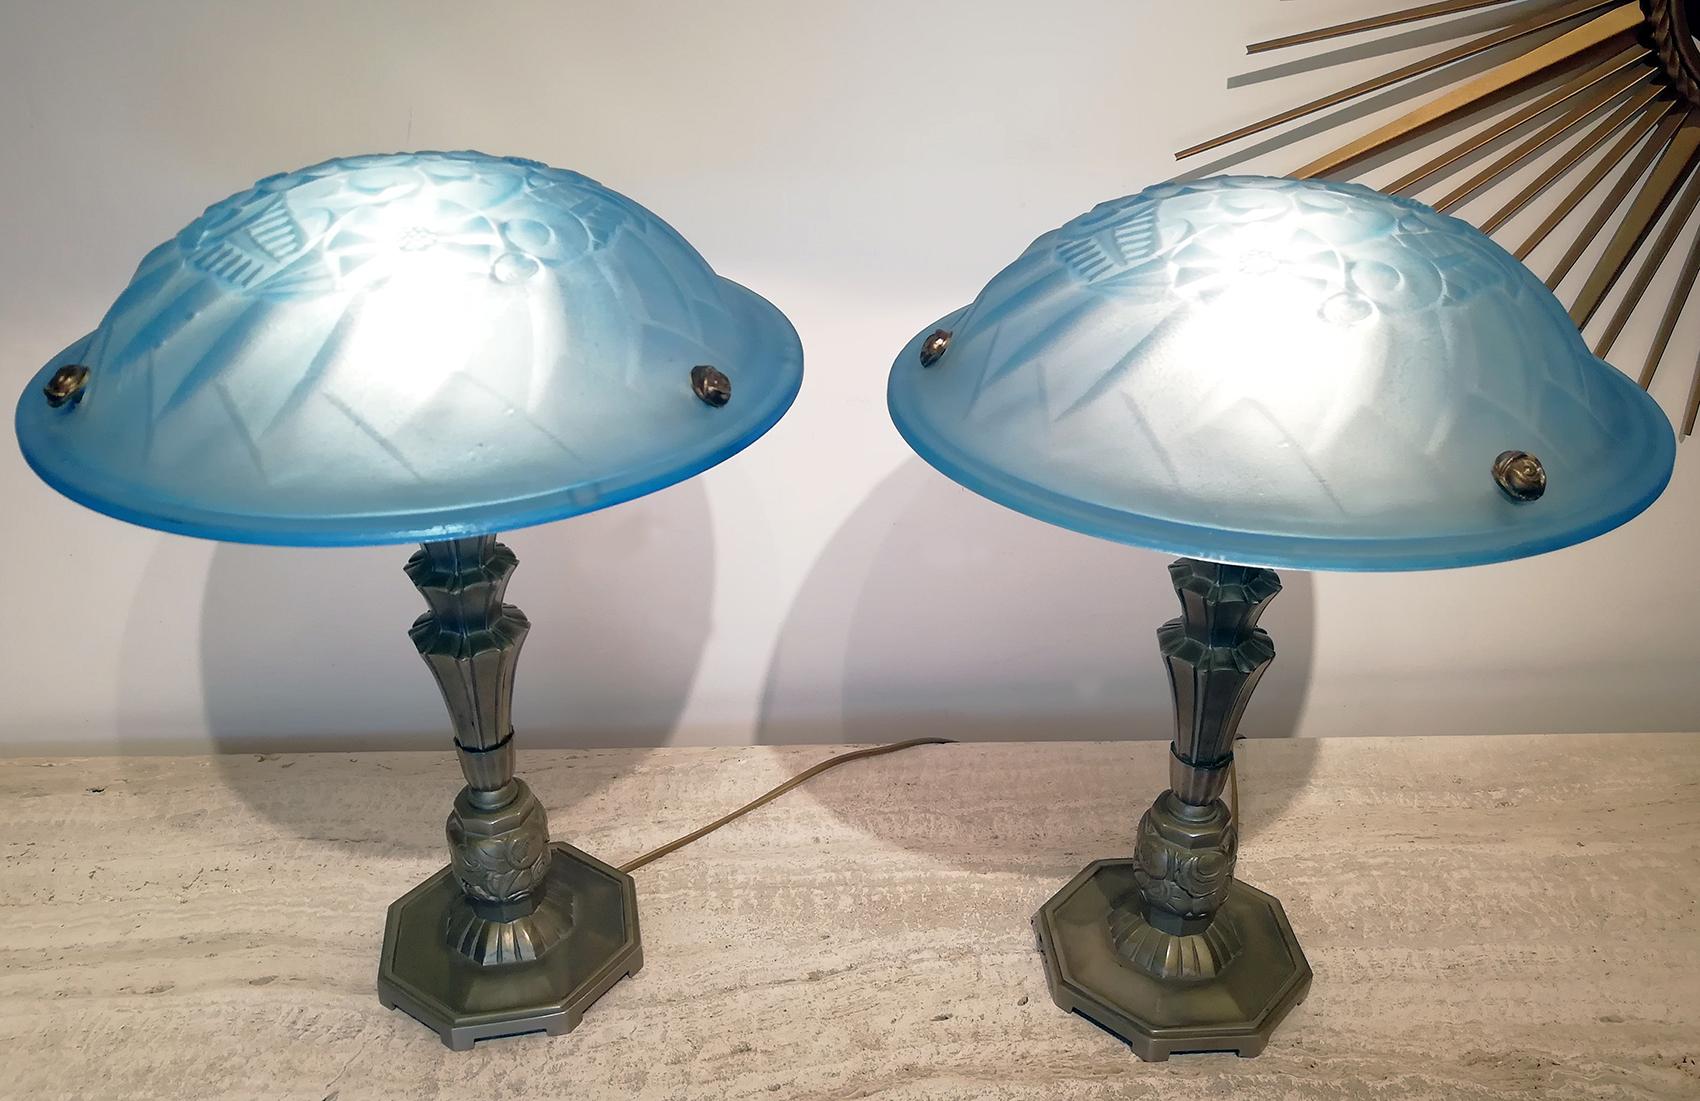 Beautiful pair of Art Deco table lamp, high quality molded glass panel (diameter: 35 cm) in blue color with floral motif design designed by Degue, supported by bronze metal column with beautiful geometric and floral motif design. Charming when